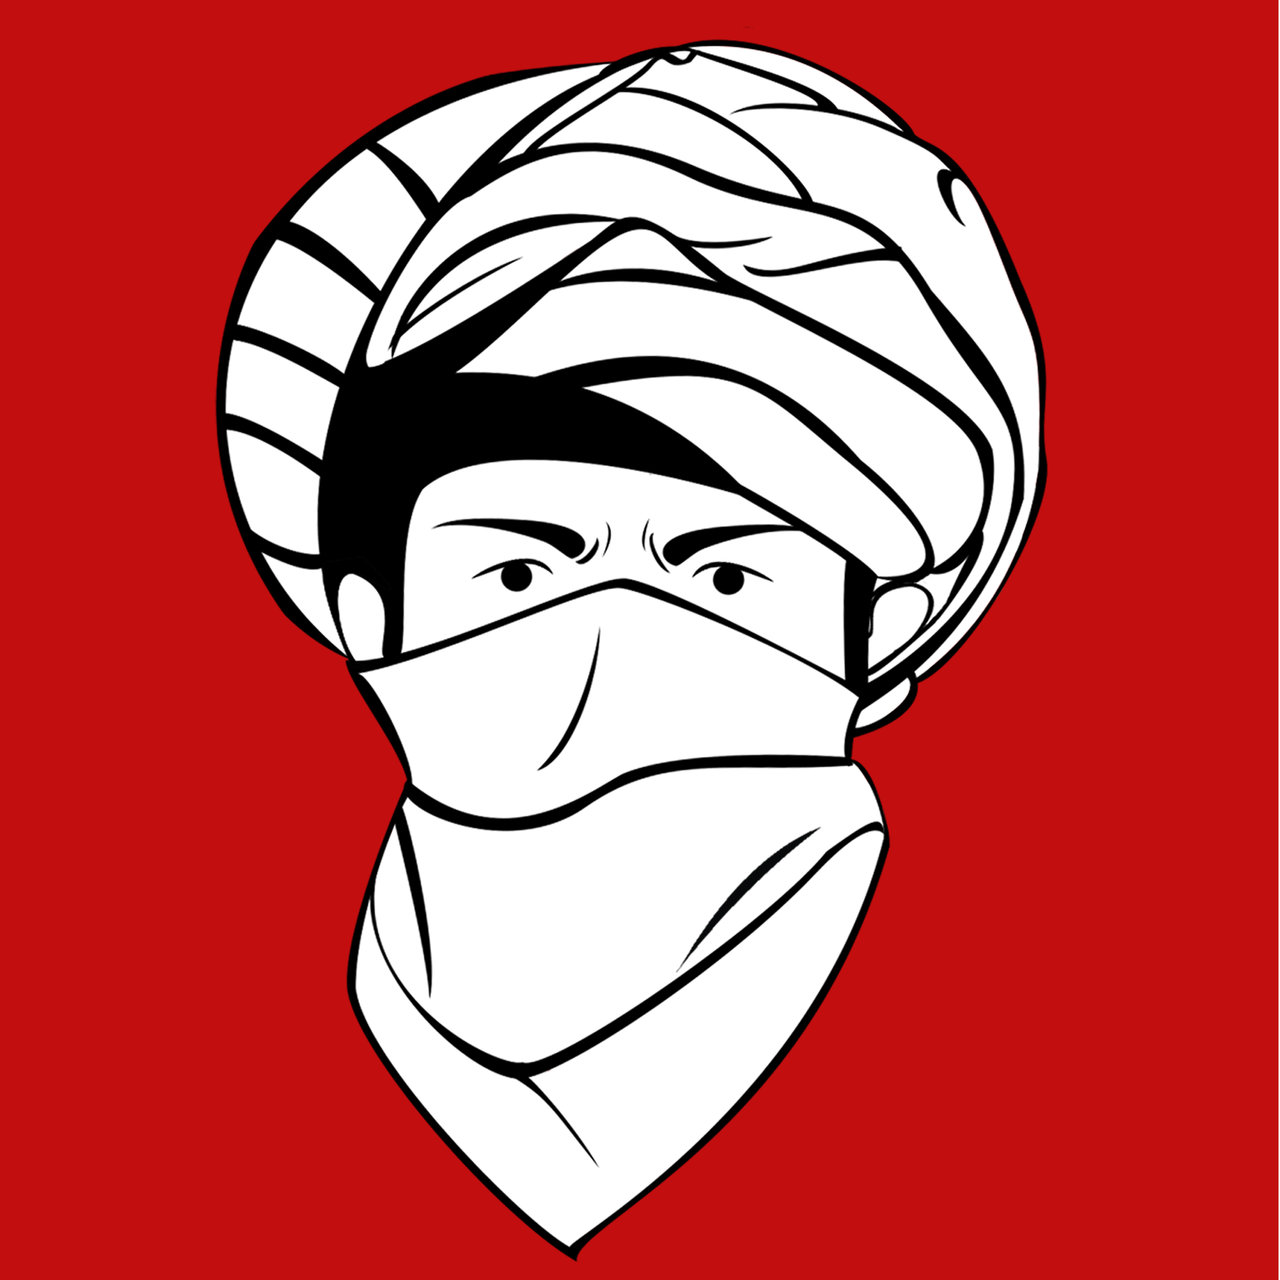 Taliban clipart - Clipground